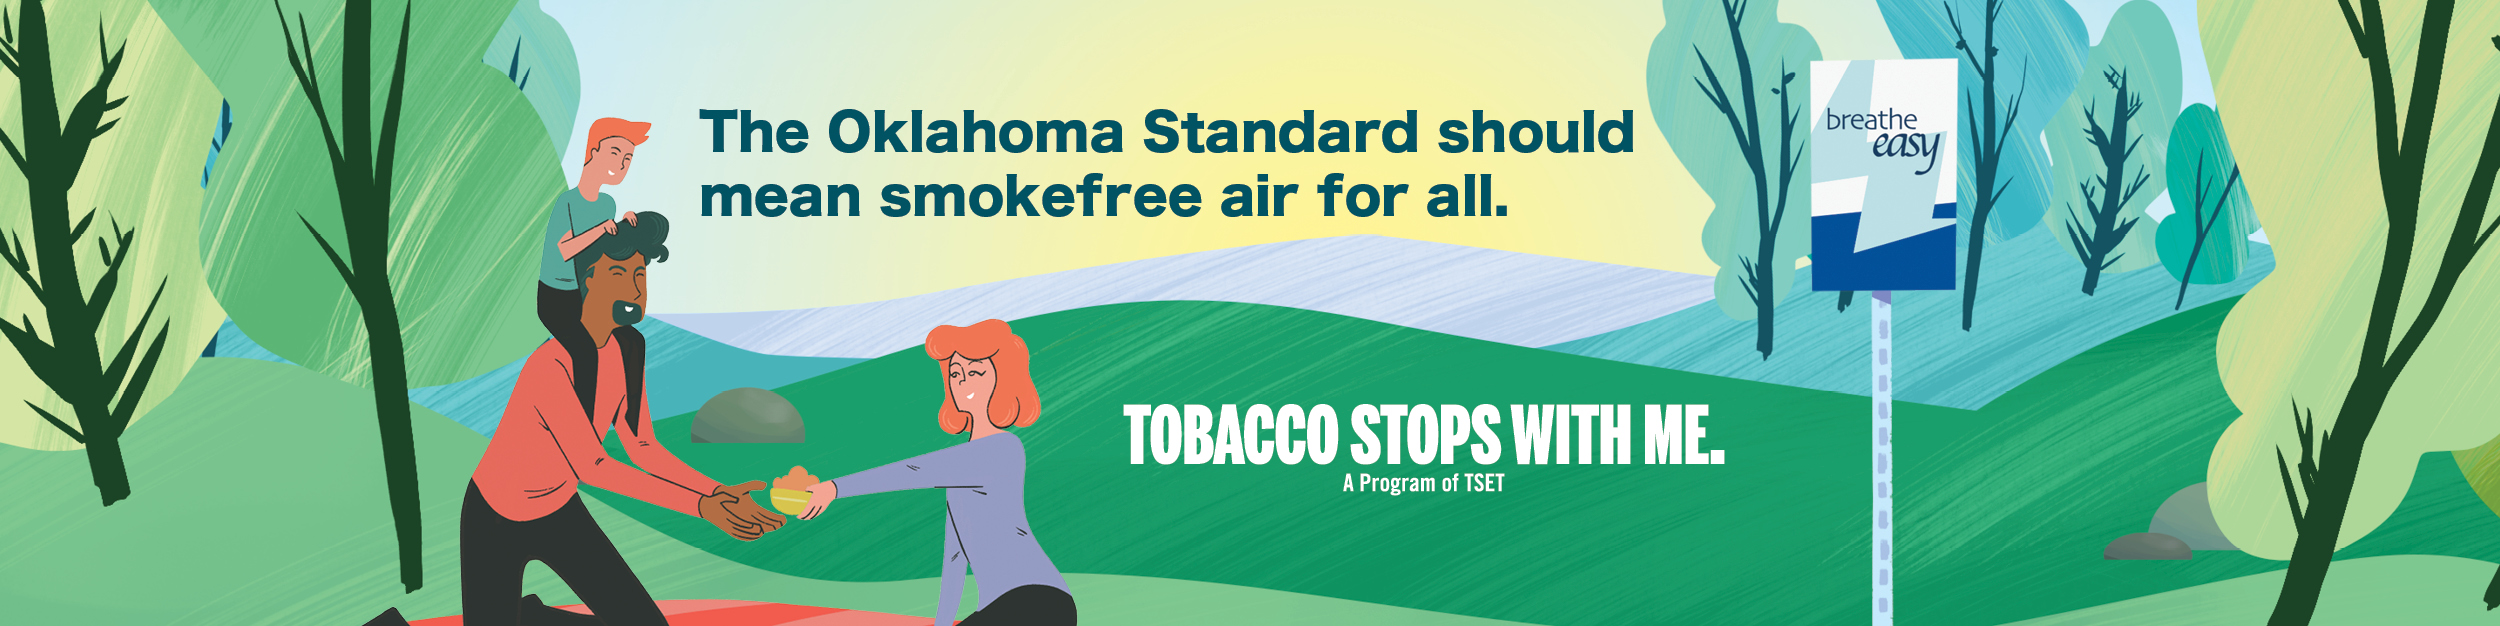 Tobacco Stops With Me banner